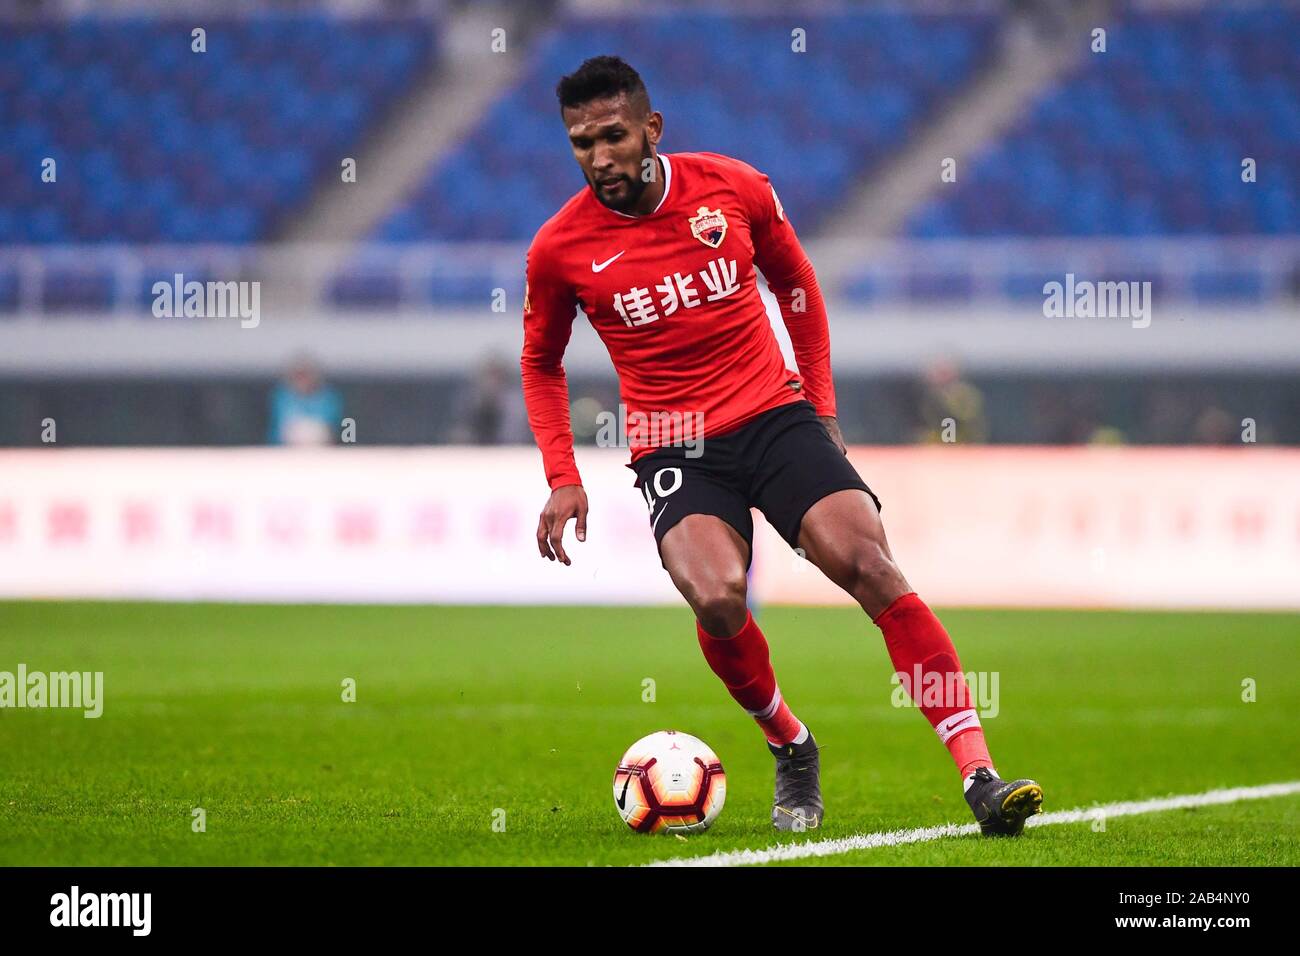 Brazilian-born Portuguese football player Dyego Sousa of Shenzhen F.C. keeps the ball during the 28th round match of Chinese Football Association Super League (CSL) against Tianjin TEDA in Tianjin, China, 23 November 2019. Tianjin TEDA slashed Shenzhen F.C. with 3-0. Stock Photo